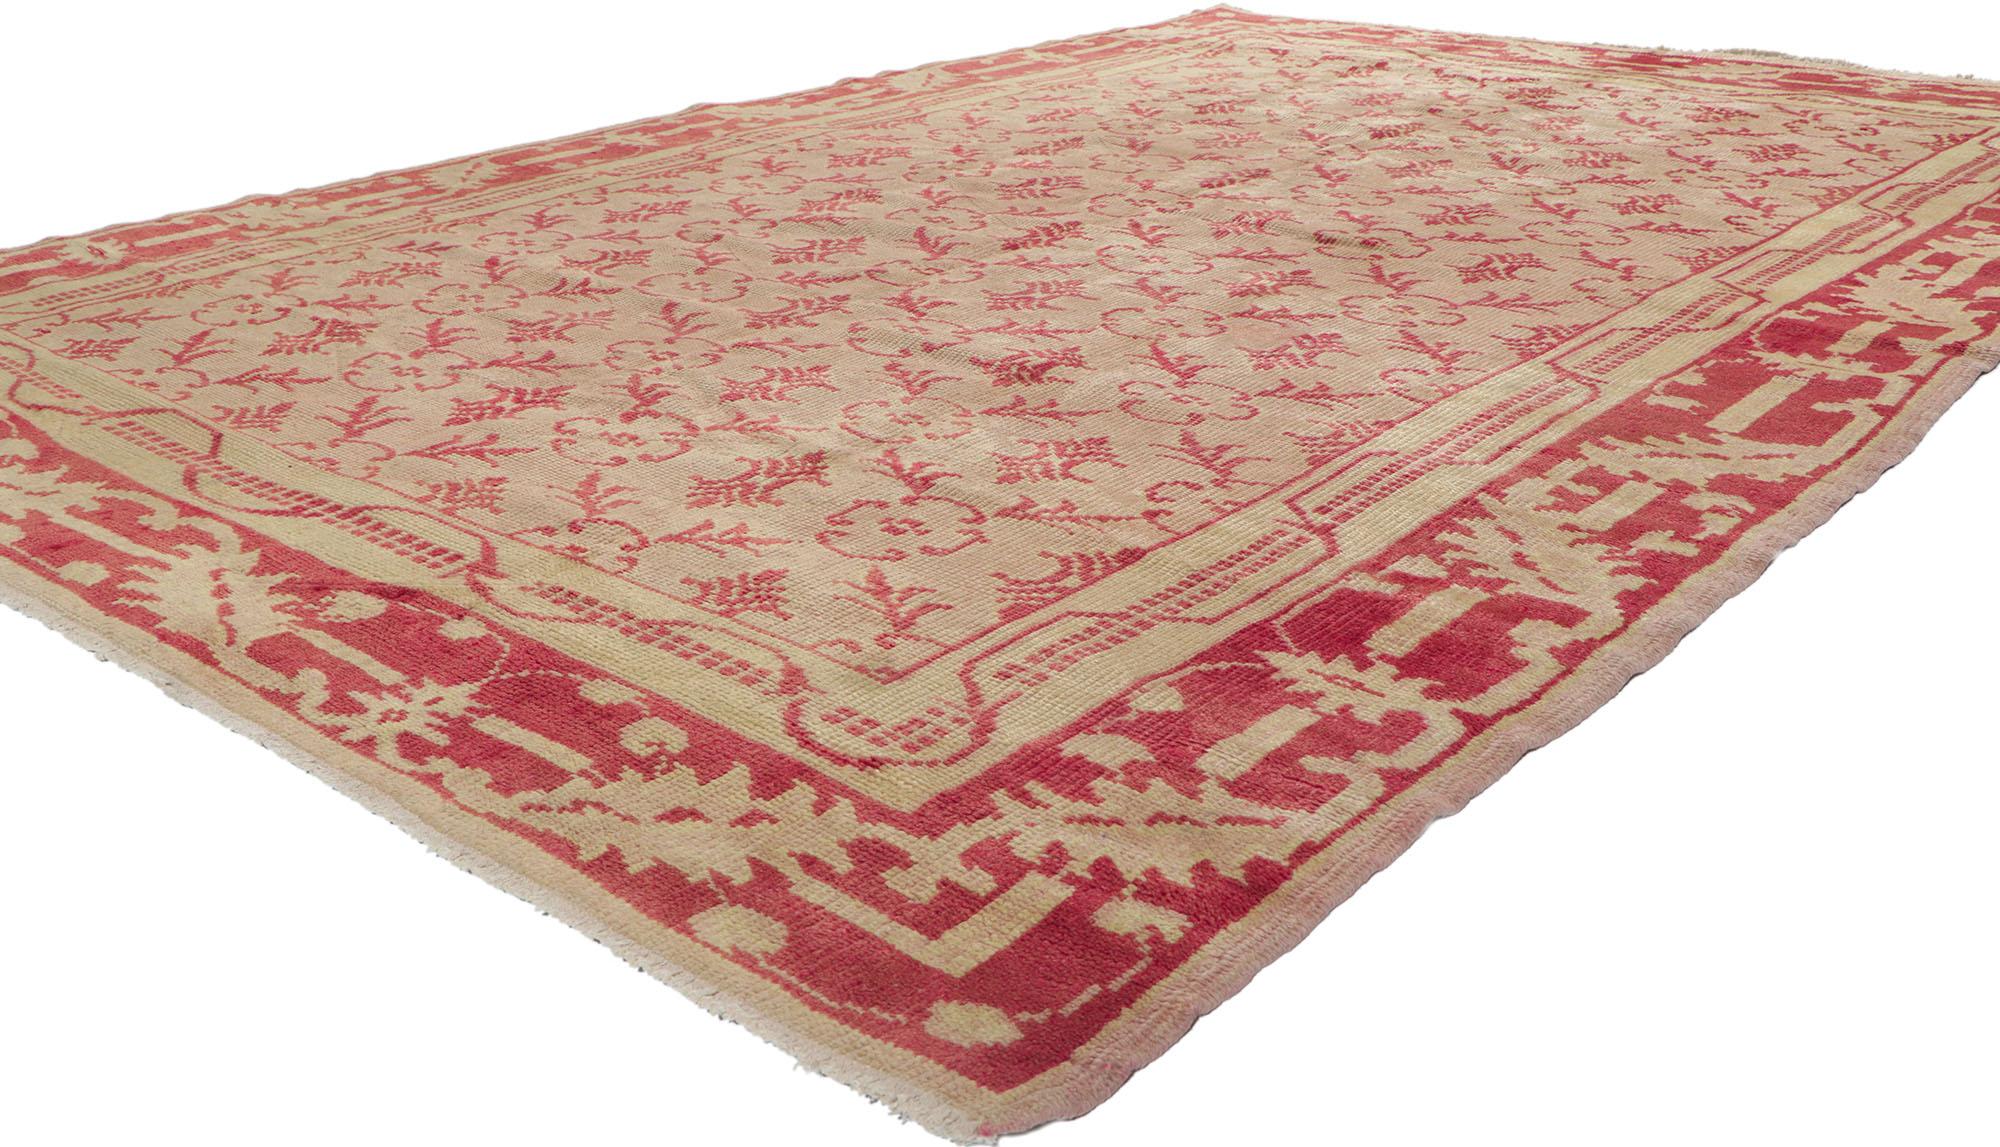 50342, vintage Turkish Oushak rug with lattice and leaf border, traditional style. This hand-knotted wool vintage Turkish Oushak rug features an allover red floral lattice pattern on an abrashed light pink field. Red abstract flower blossoms sit at